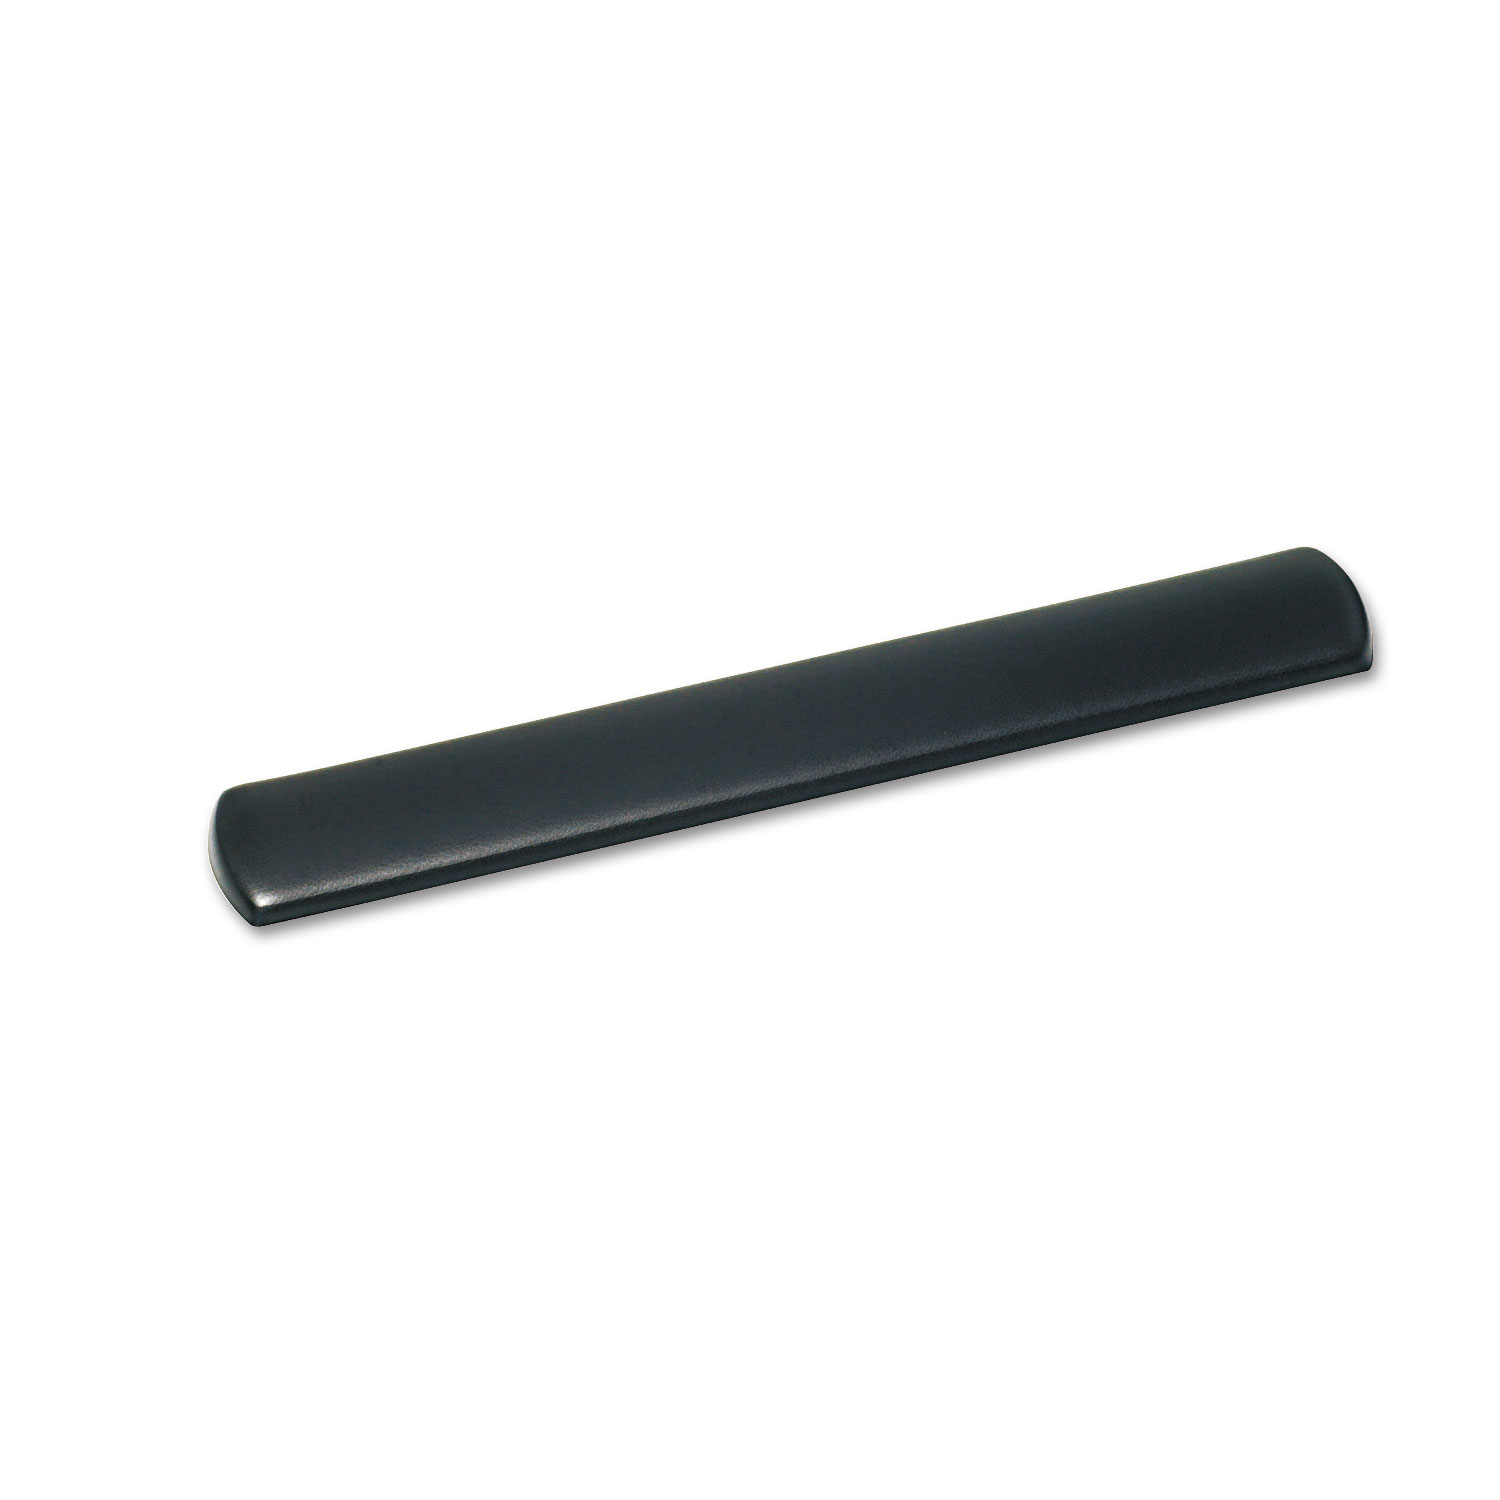  3M WR310LE Gel Wrist Rest for Keyboard, Leatherette Cover, Antimicrobial, Black (MMMWR310LE) 